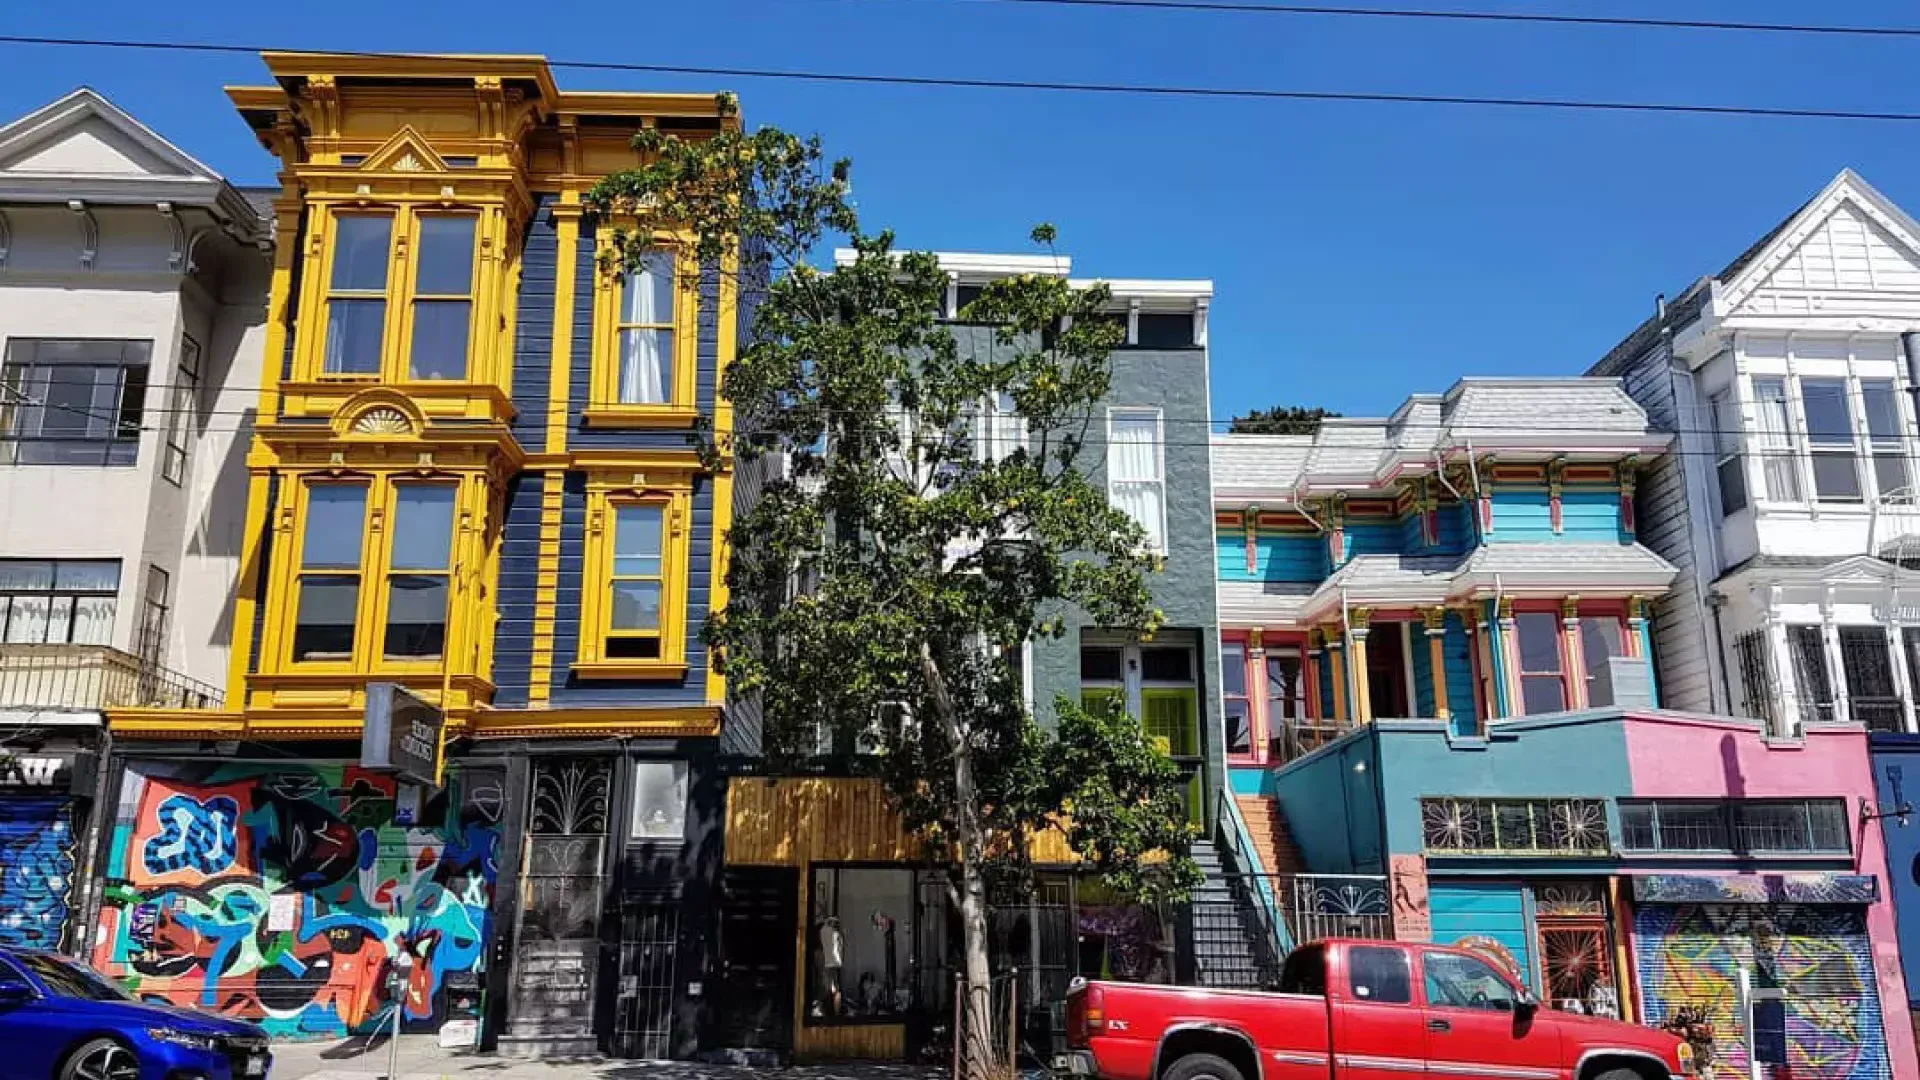 View of colorful buildings on Haight Street with cars parked along the street. San Francisco, California.